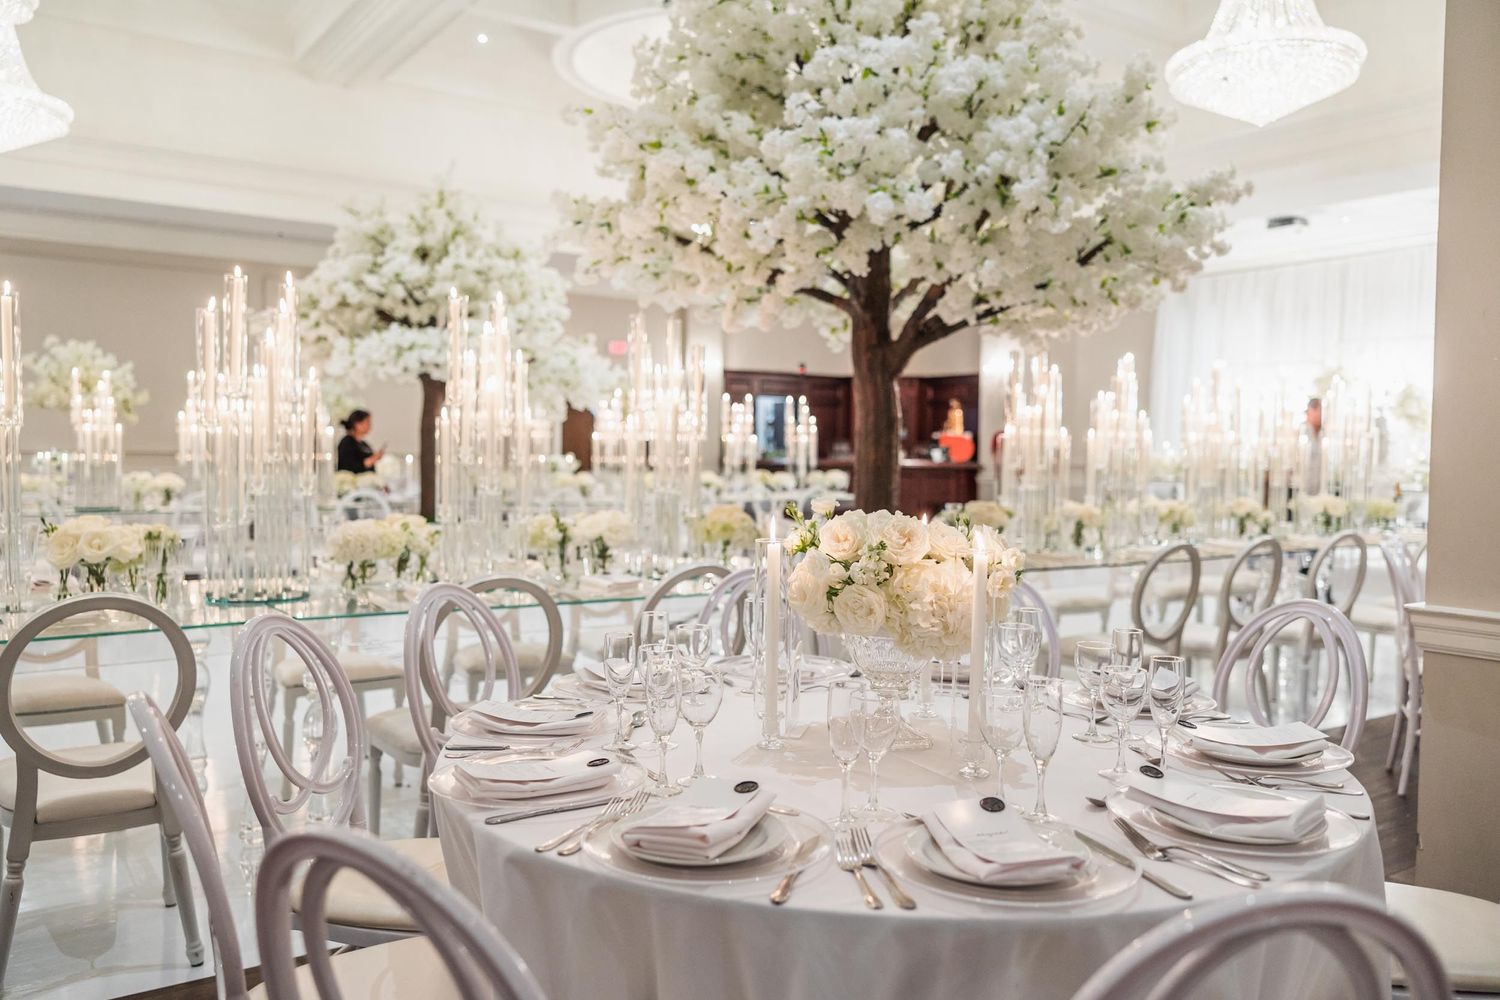 Luxurious spaces for unforgettable events